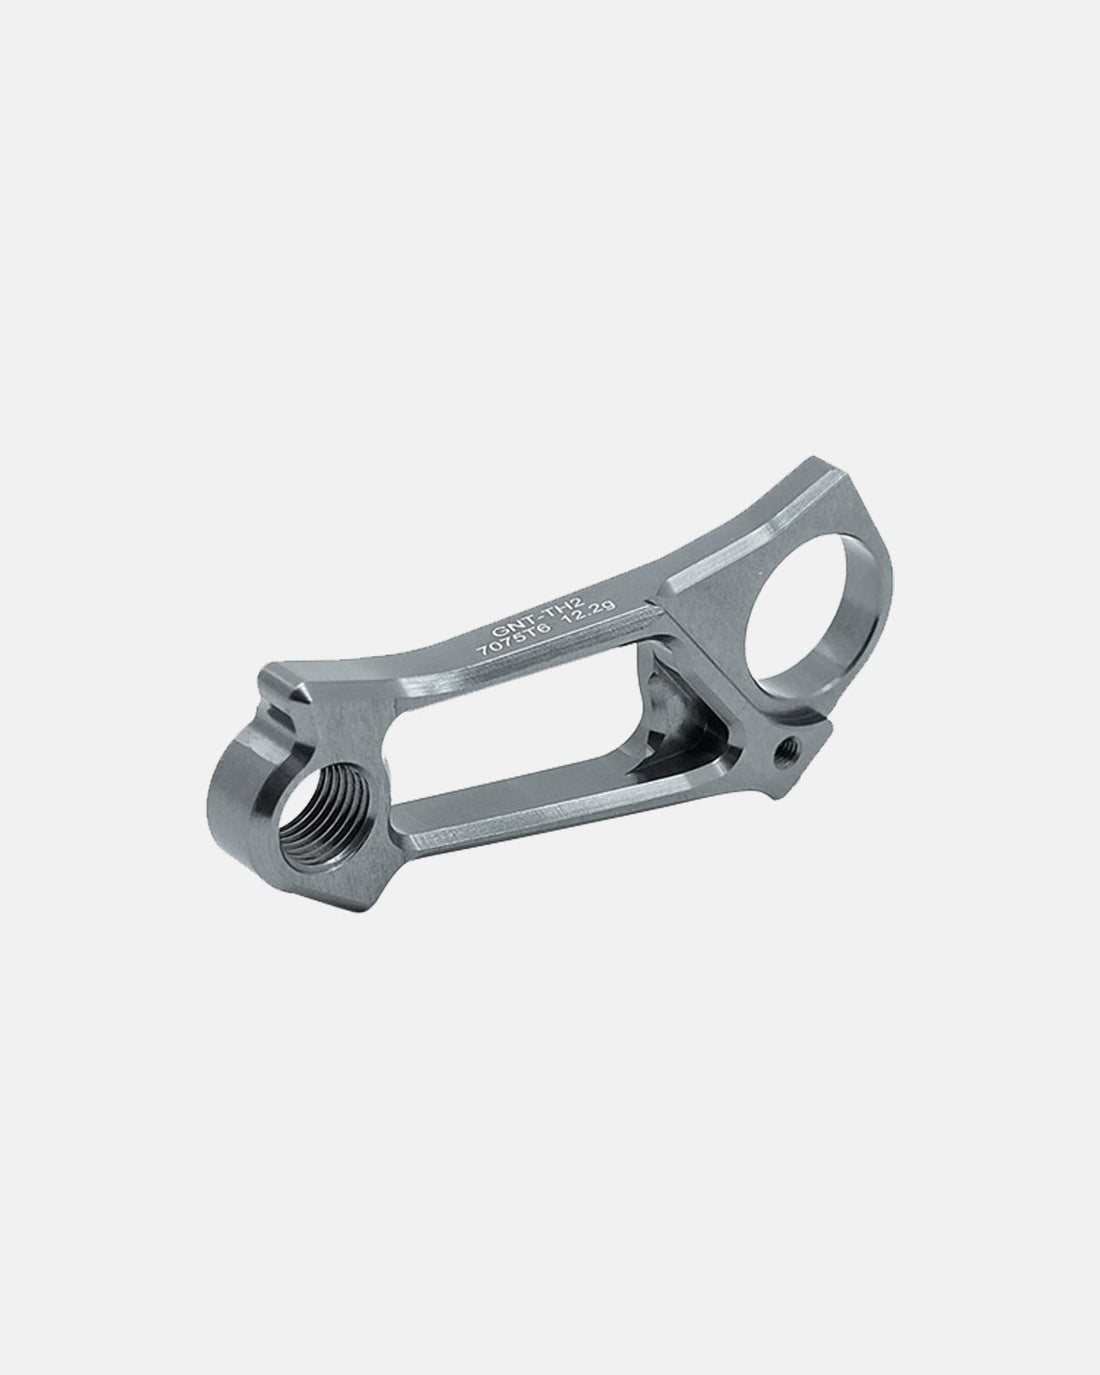 Sigeyi Giant TCR Direct-Mount Derailleur Hanger - Disc - Sigeyi